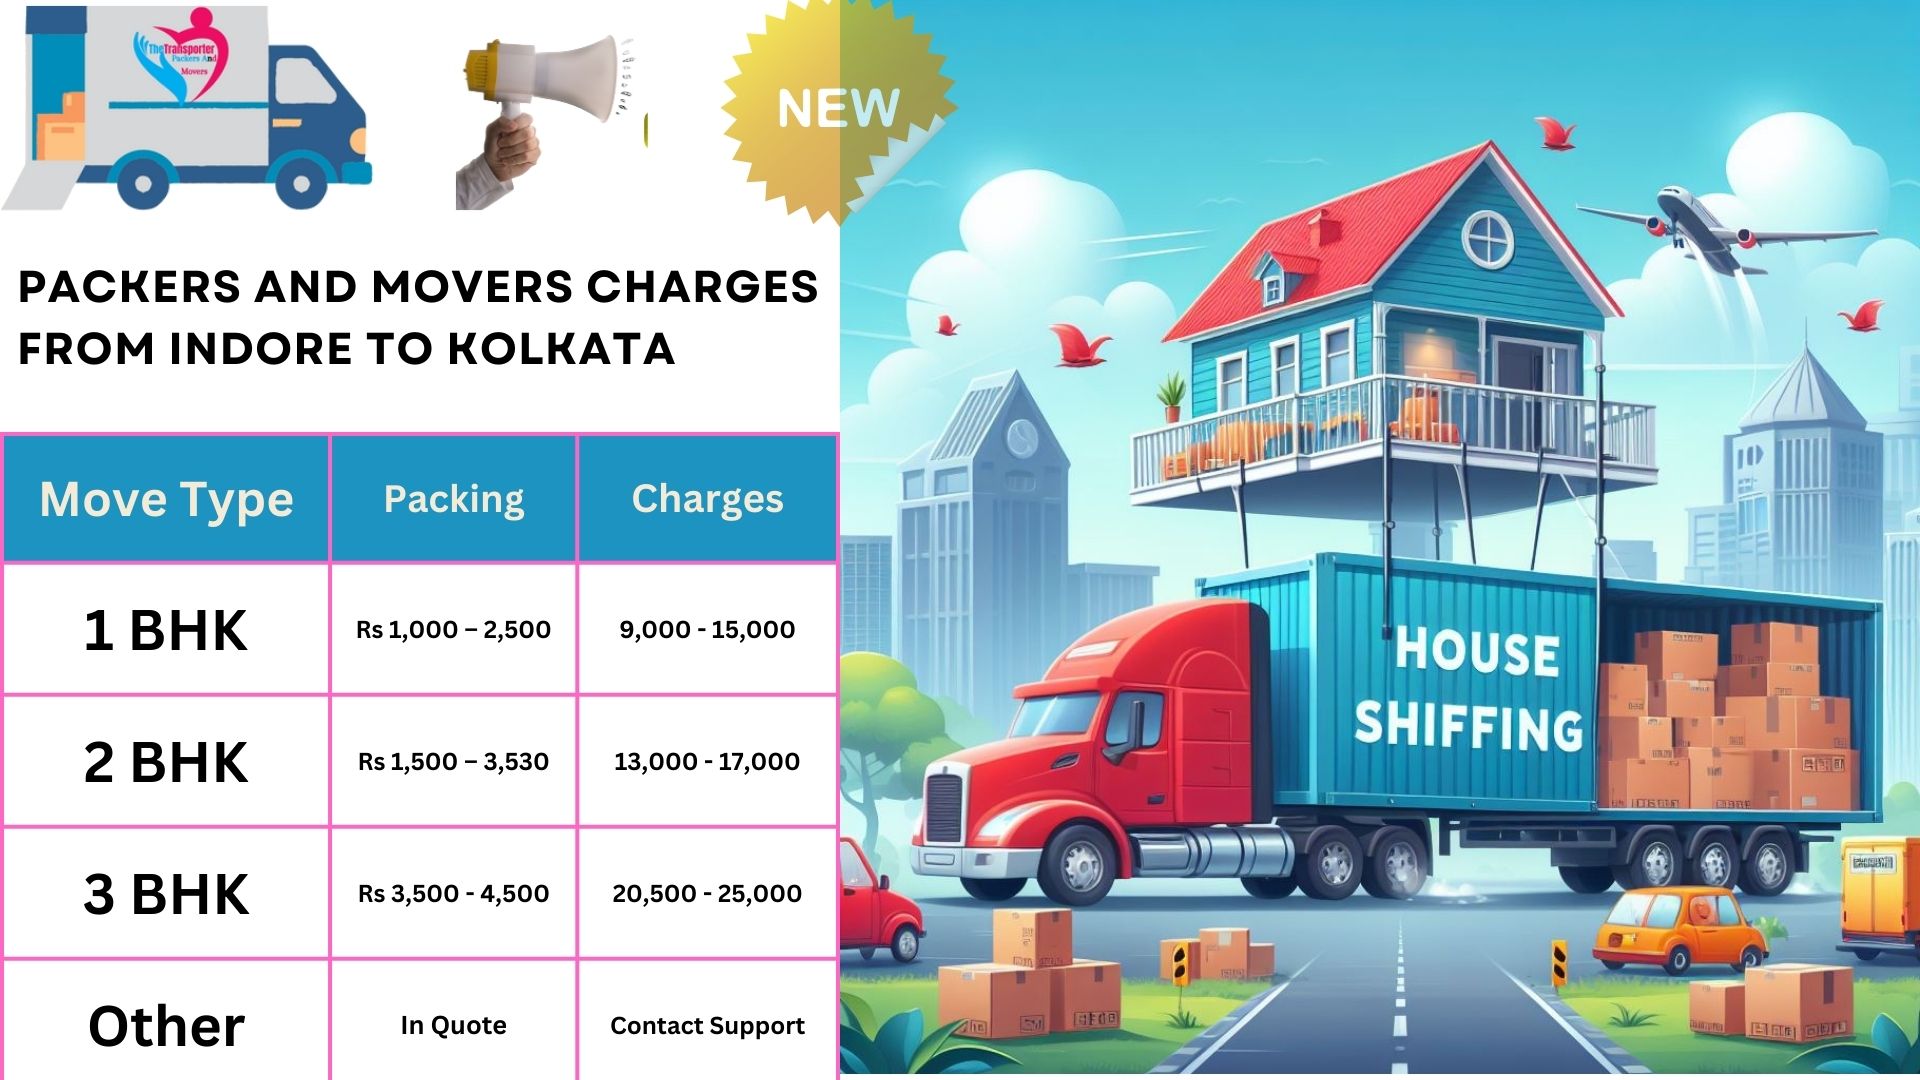 Your household goods shifting from Indore to Kolkata